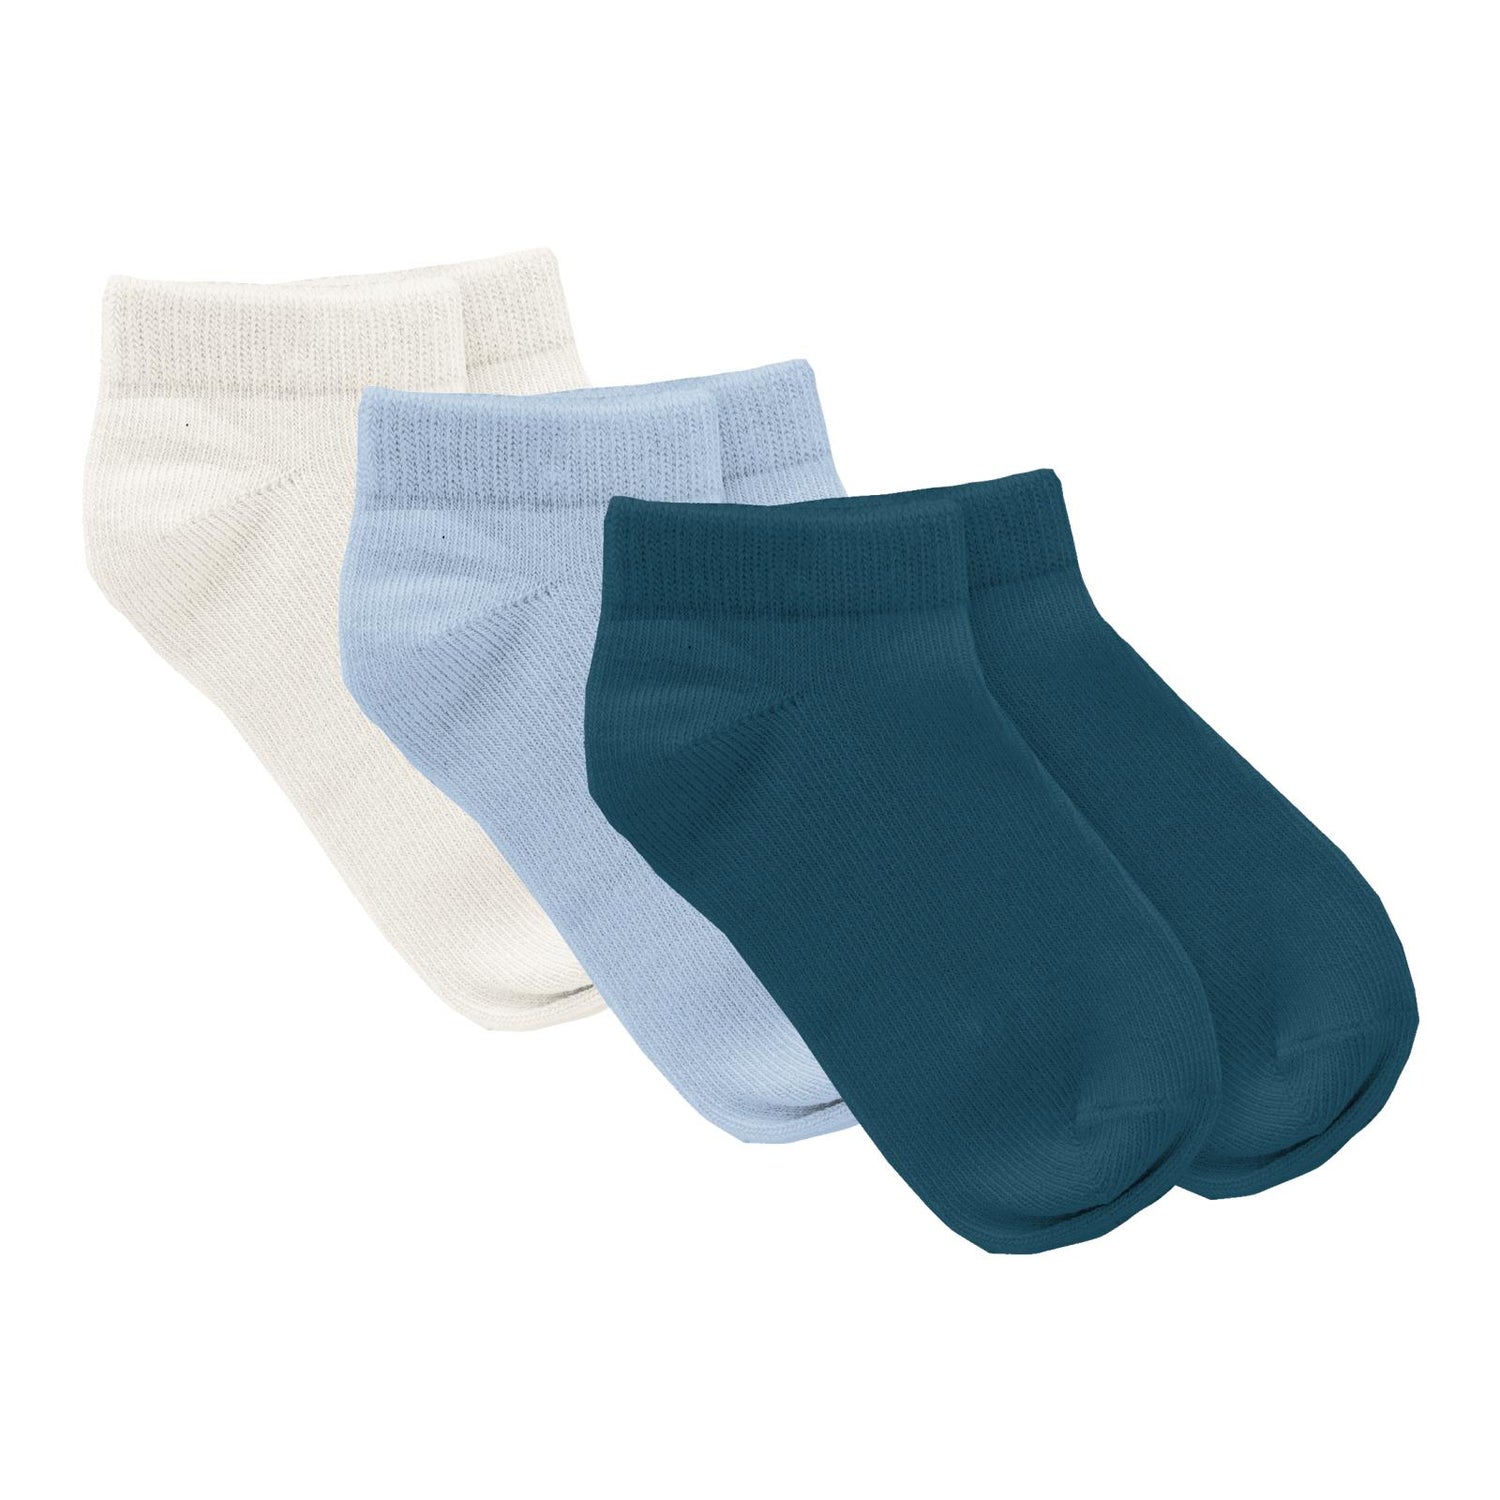 Ankle Socks Set of 3 in Peacock, Natural & Pond